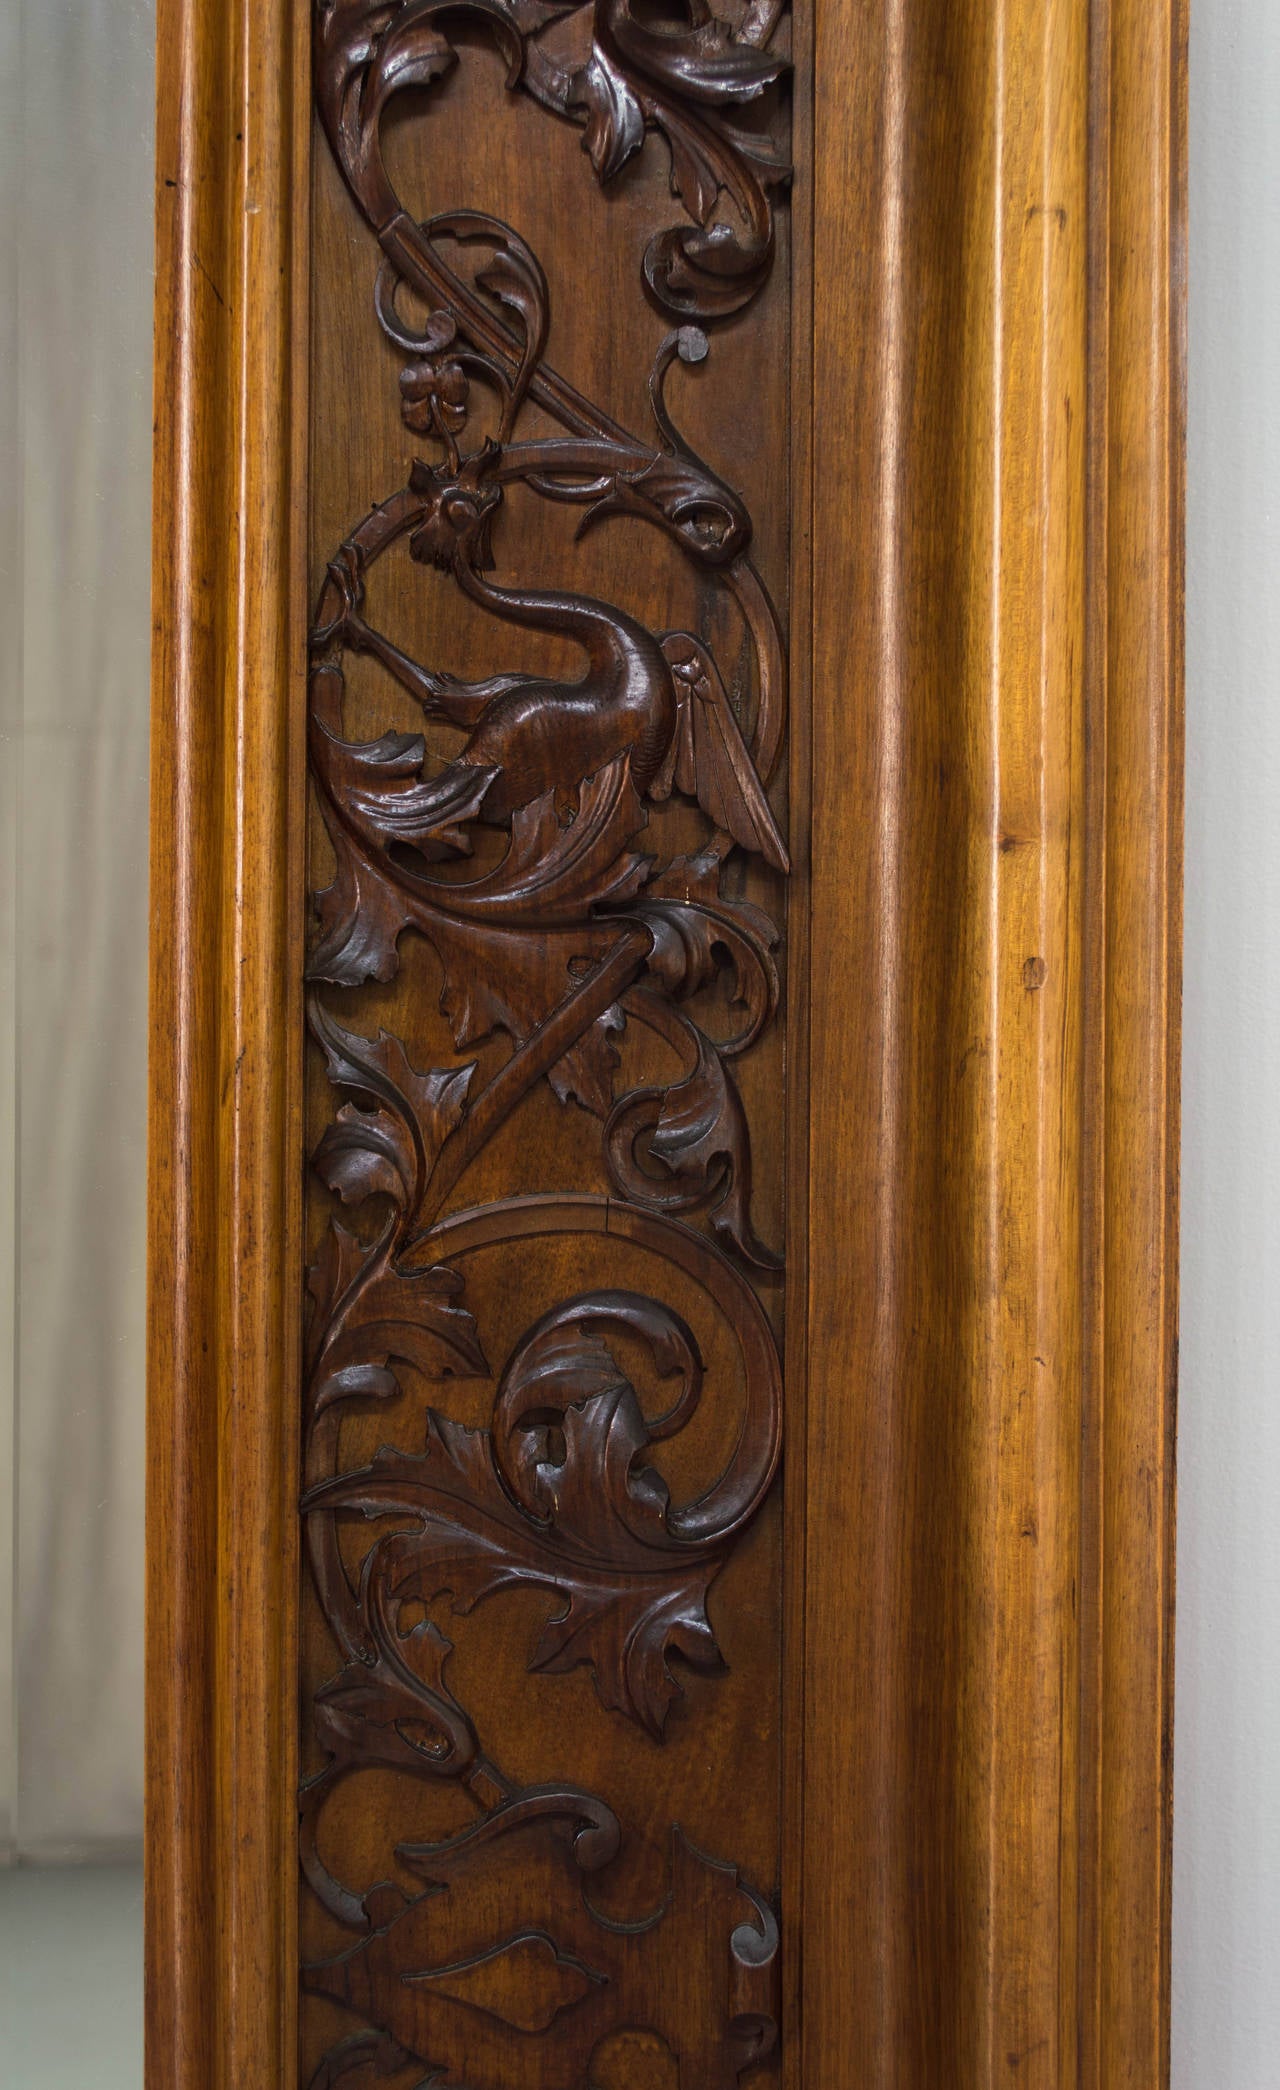 Italian Renaissance style mirror with carved walnut frame and sculptural crest. Bevelled mirror and great condition.
As always, more photos available upon request. We have a large selection of French antiques. Please visit our web site.